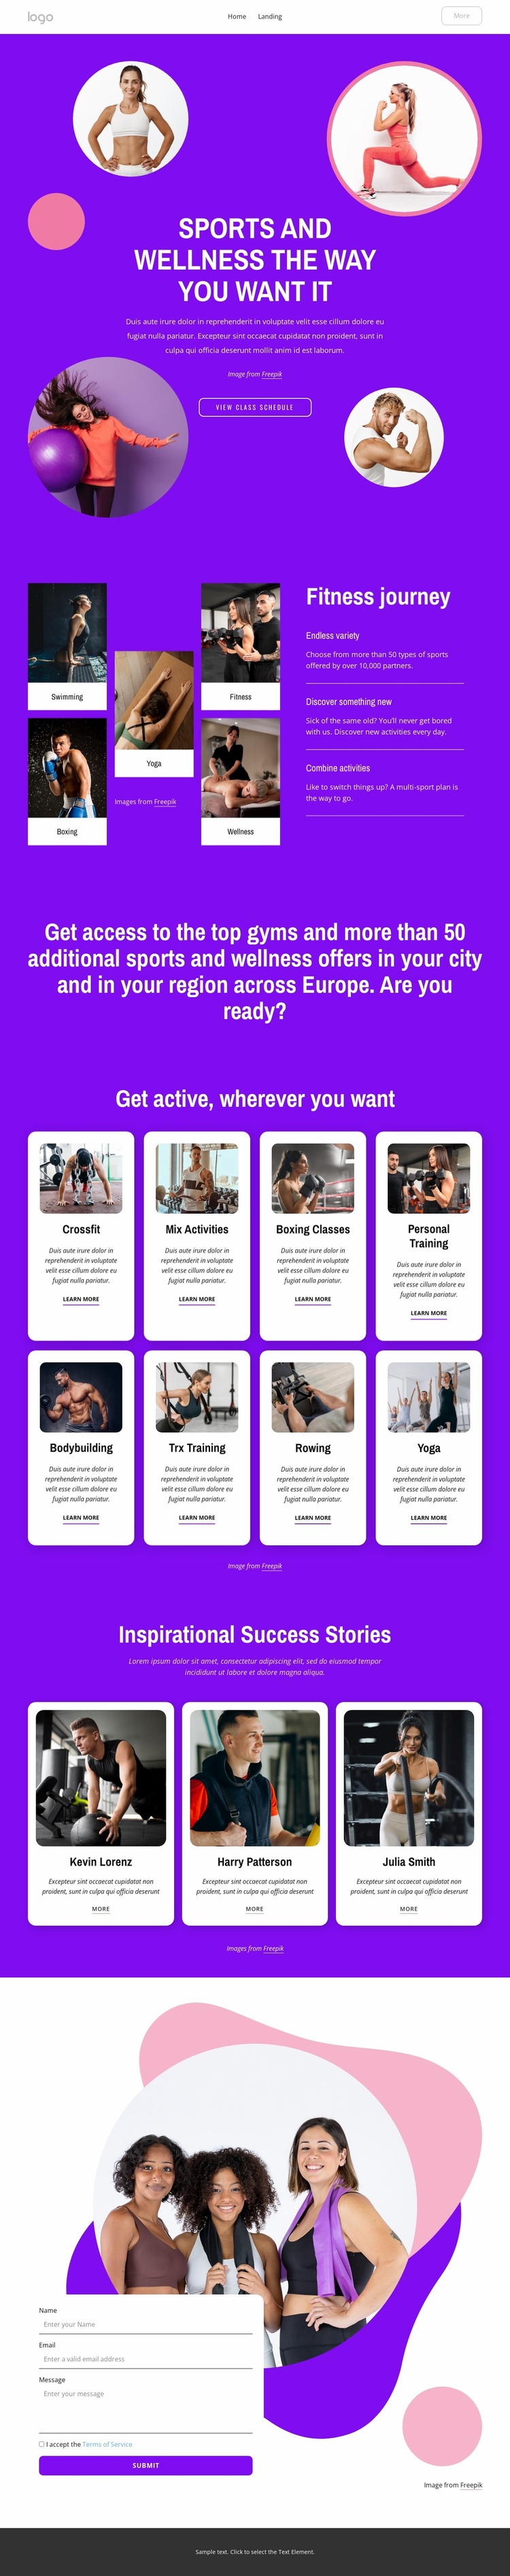 Sports and wellness the way you want it eCommerce Template